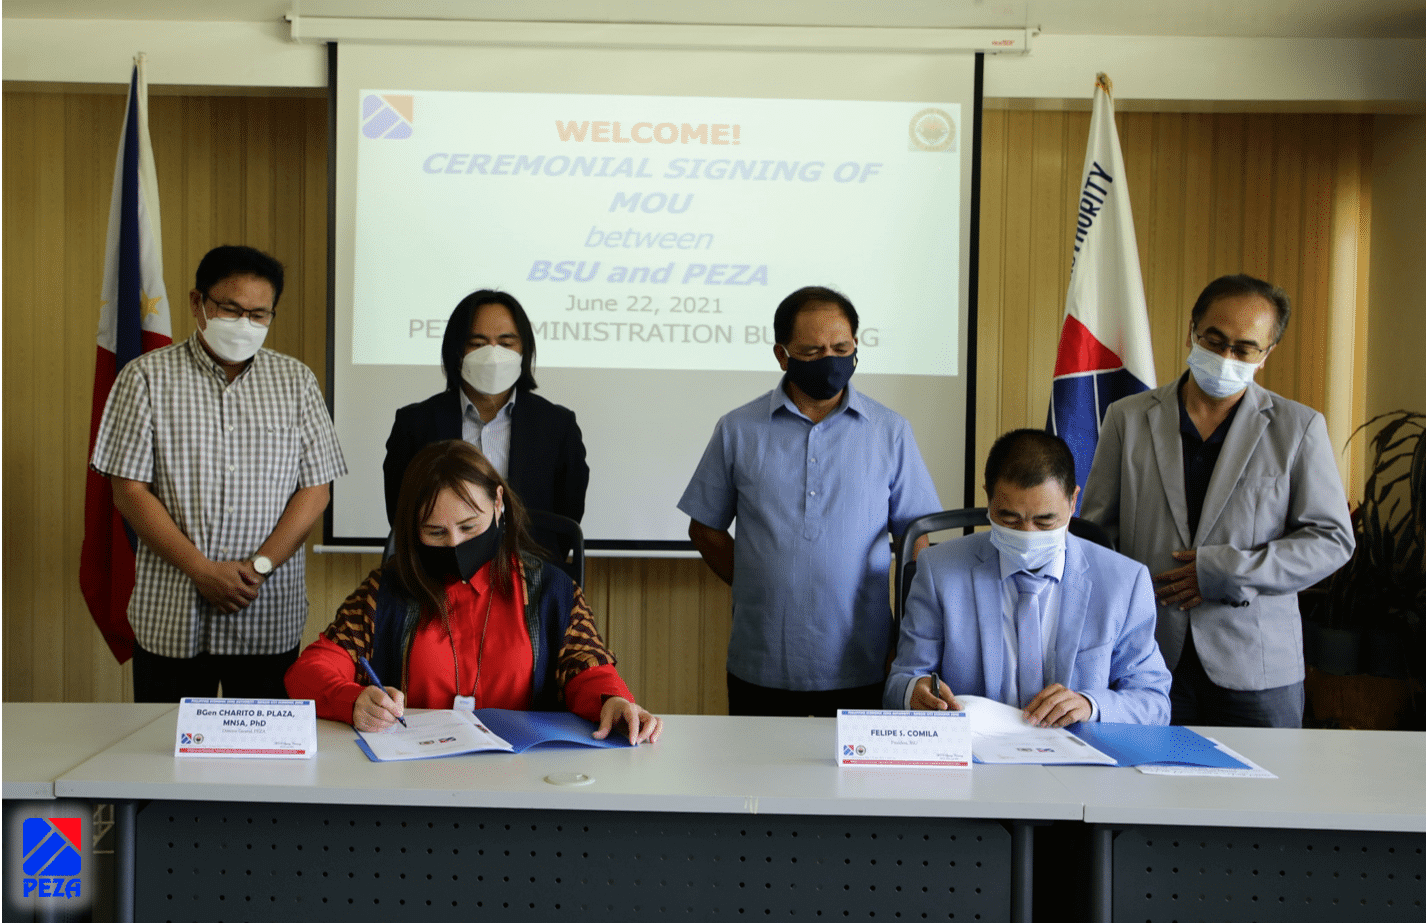 PEZA signs MoU with state universities in Baguio and Benguet